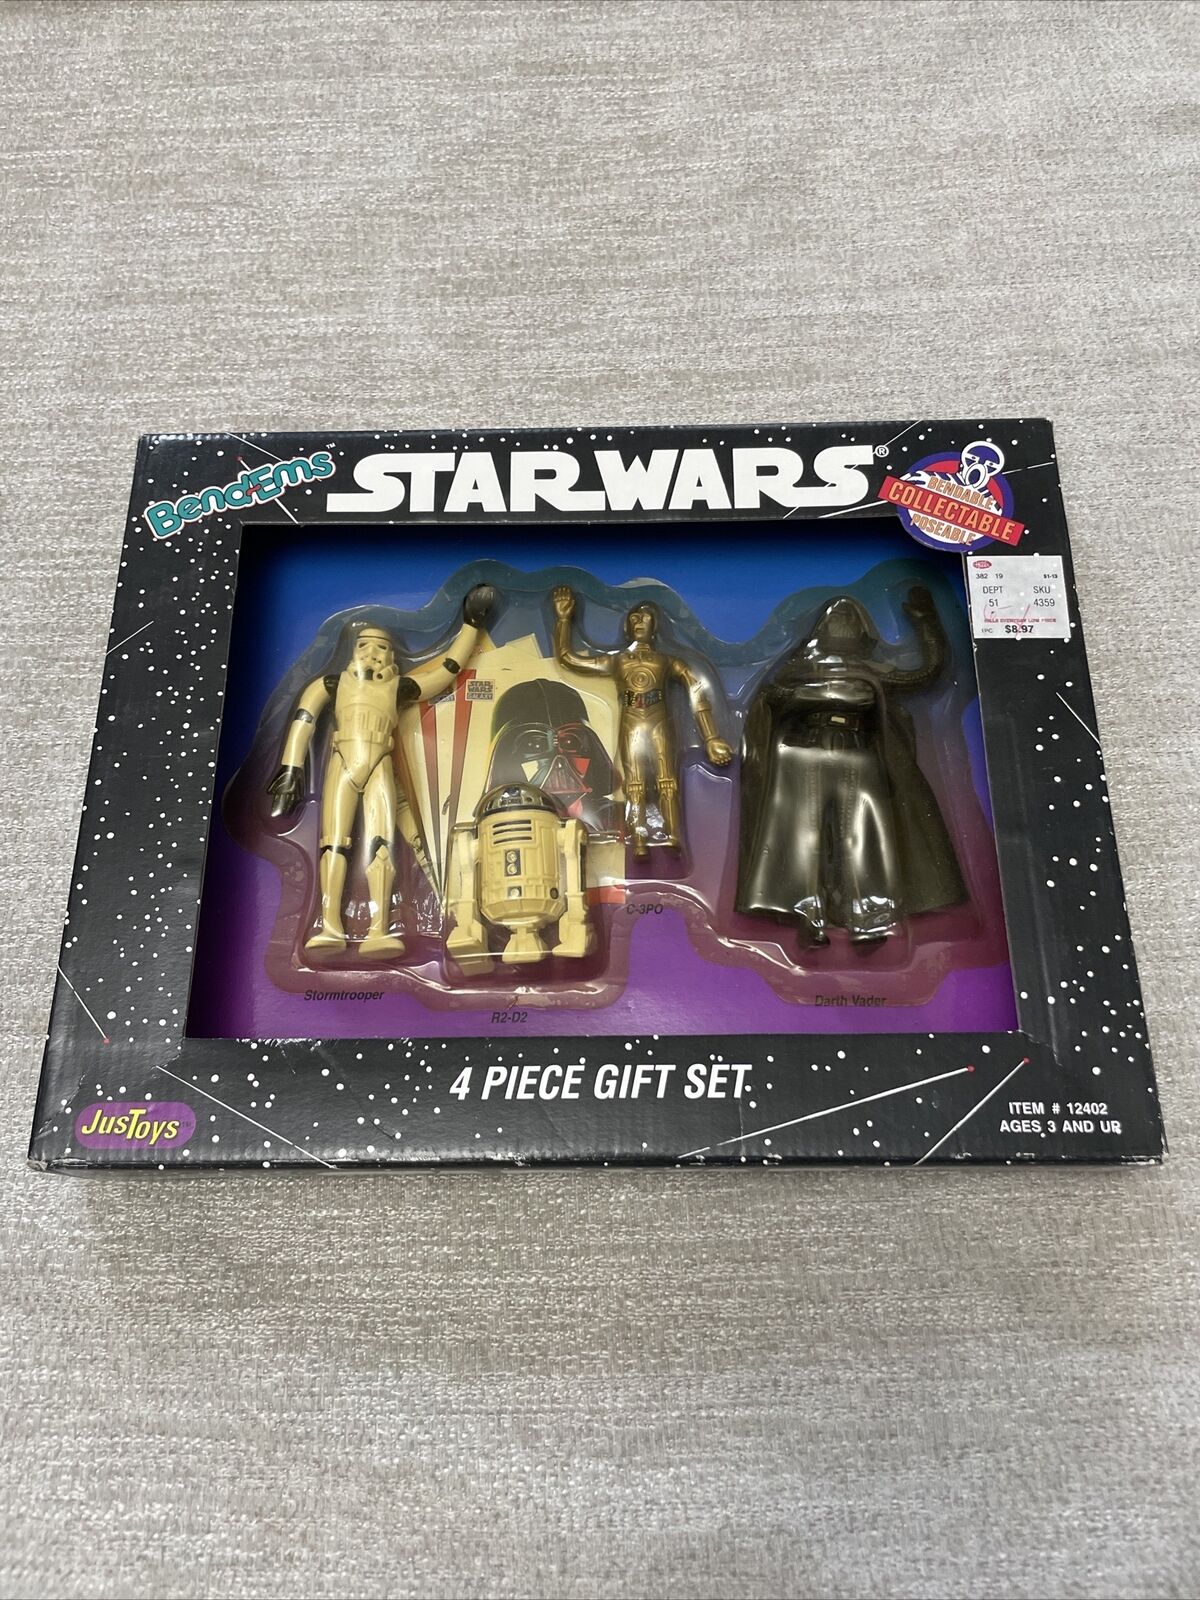 Star Wars - Bend-Ems - 4 Piece Gift Set Action Figures & Cards - NEW